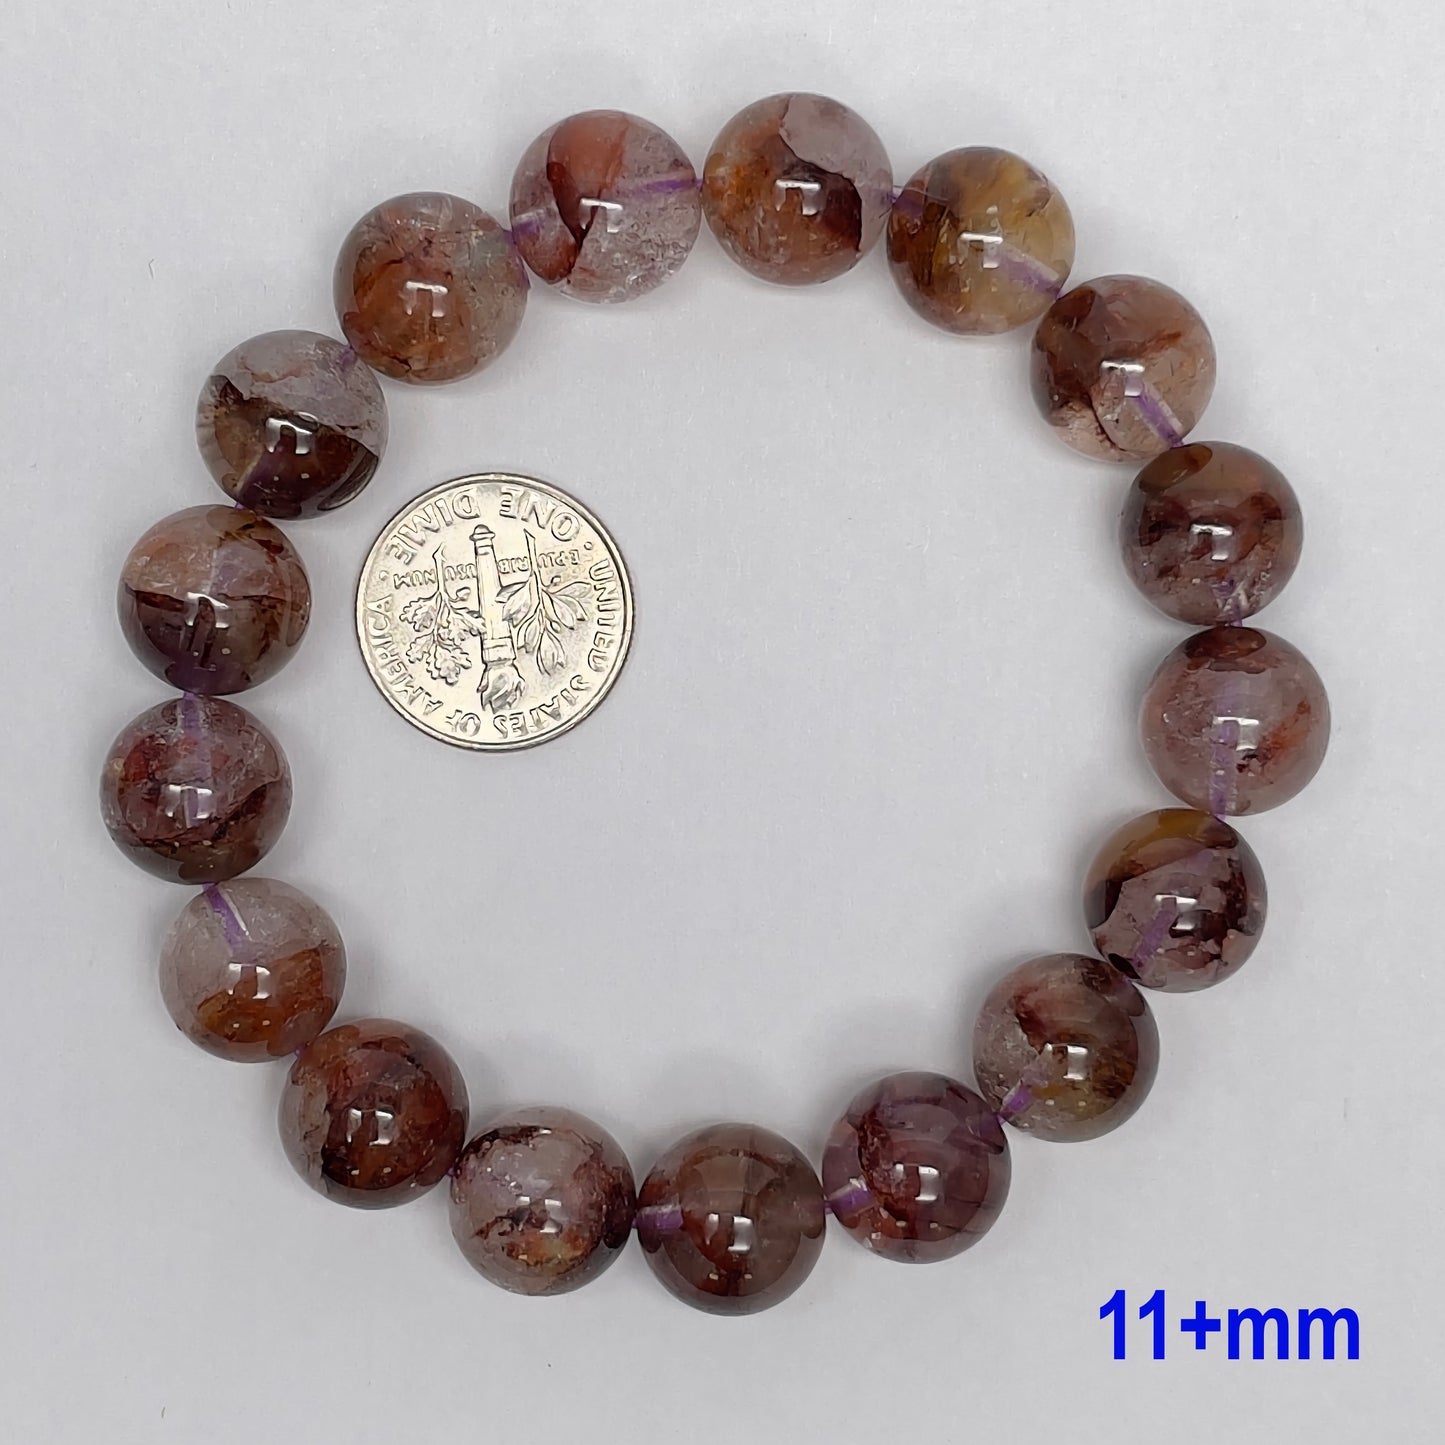 Stonelry High Quality Natural Auralite Crystal (Amethyst) Beaded Bracelet (8 to 11+mm)